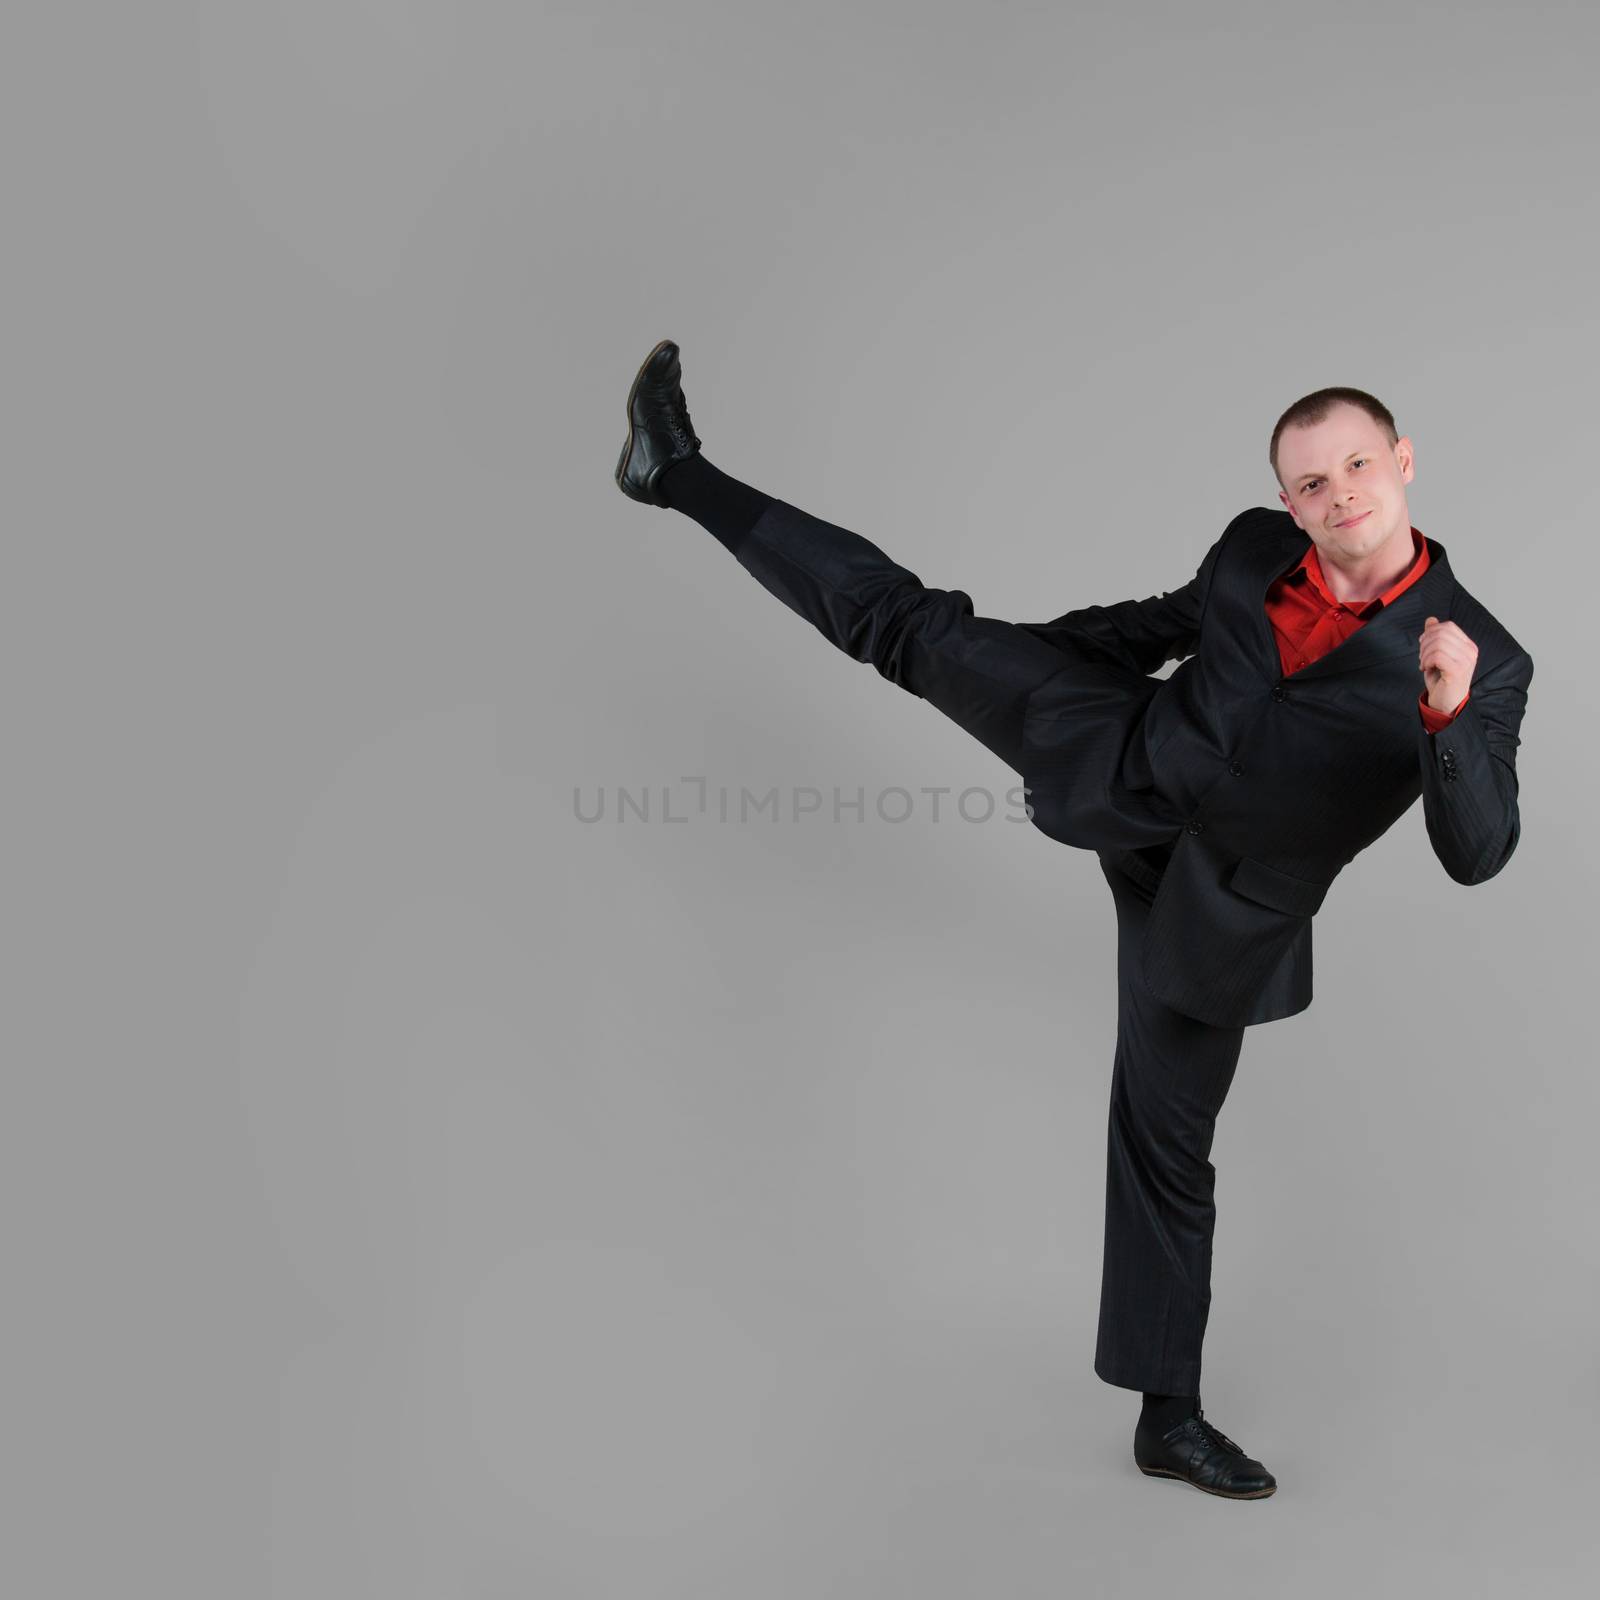 Businessman demonstrates a high kick on gray background